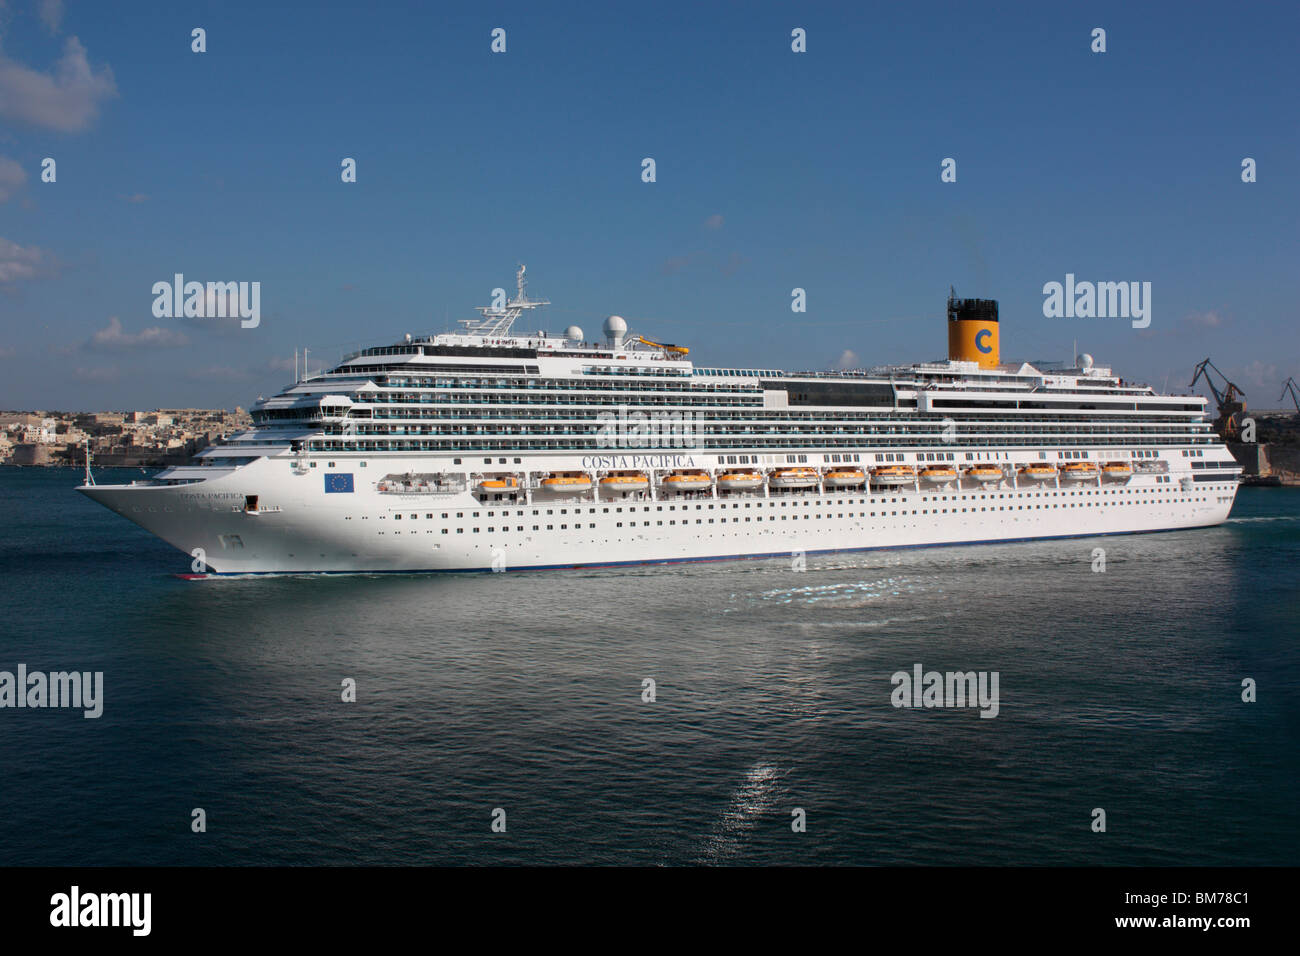 Tourism in the Mediterranean. The cruise liner Costa Pacifica departing from Malta Stock Photo